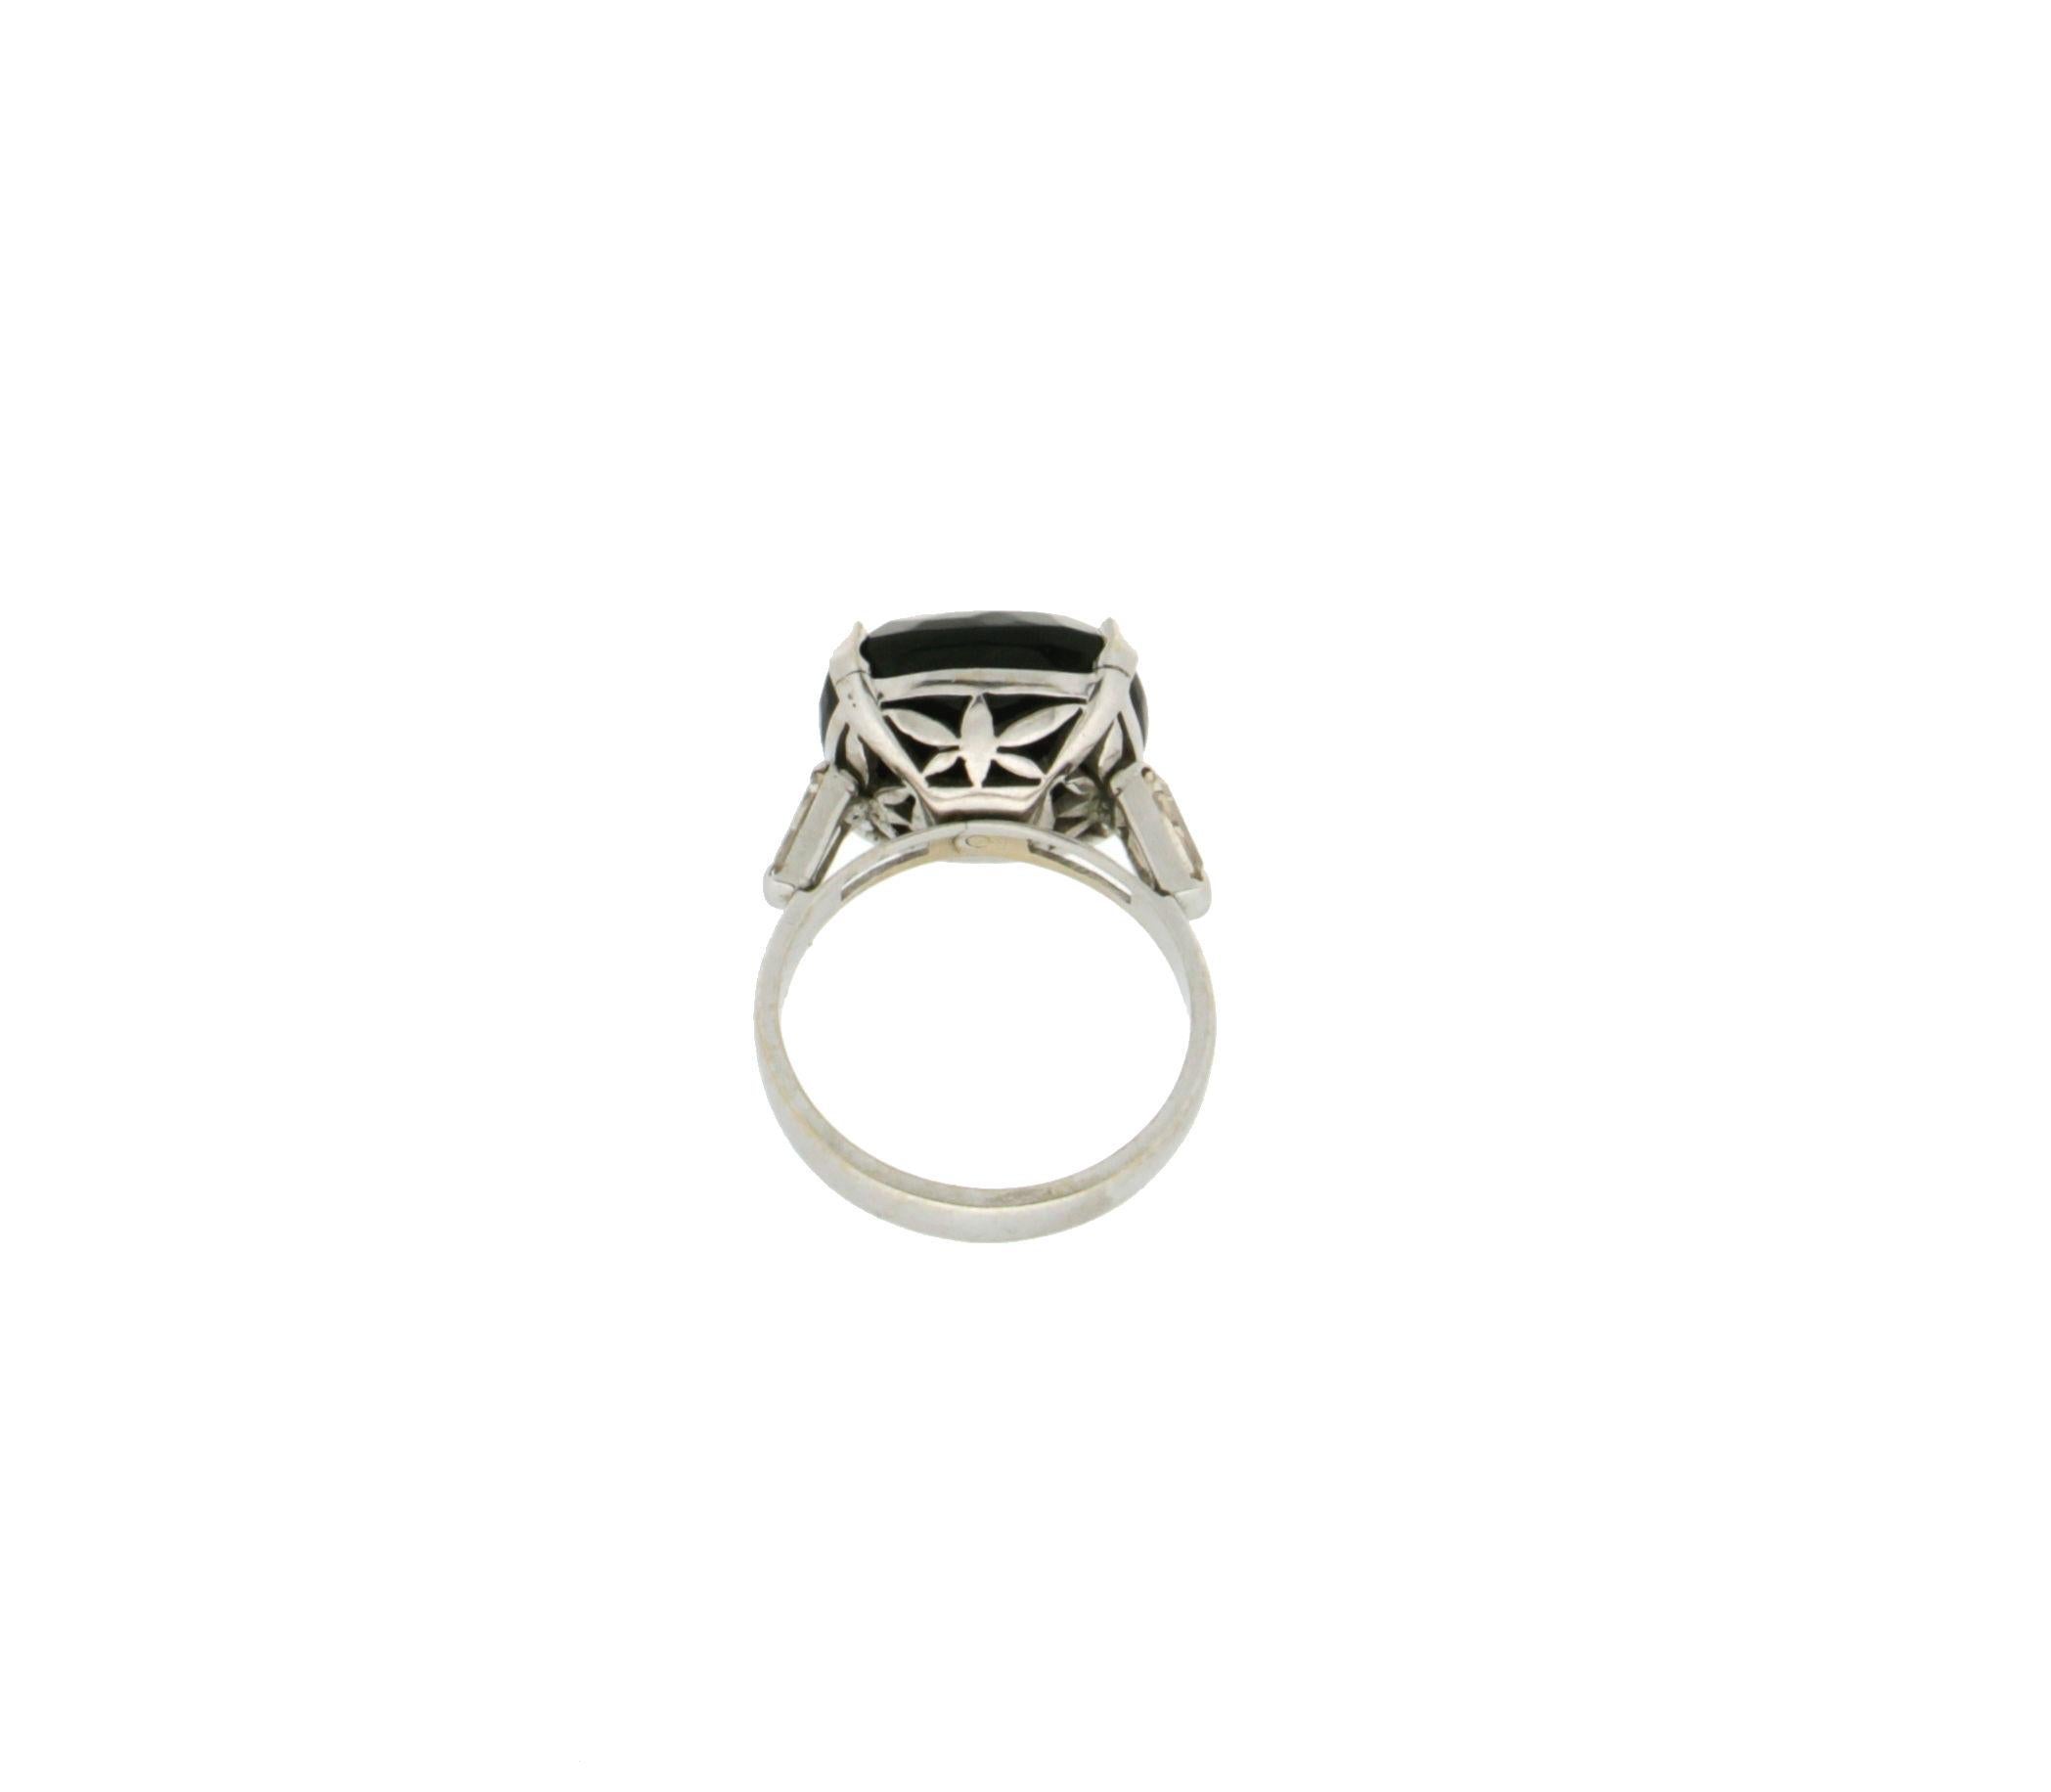 Handcraft 18 Karat White Gold Onyx and Diamond Cocktail Ring For Sale 2